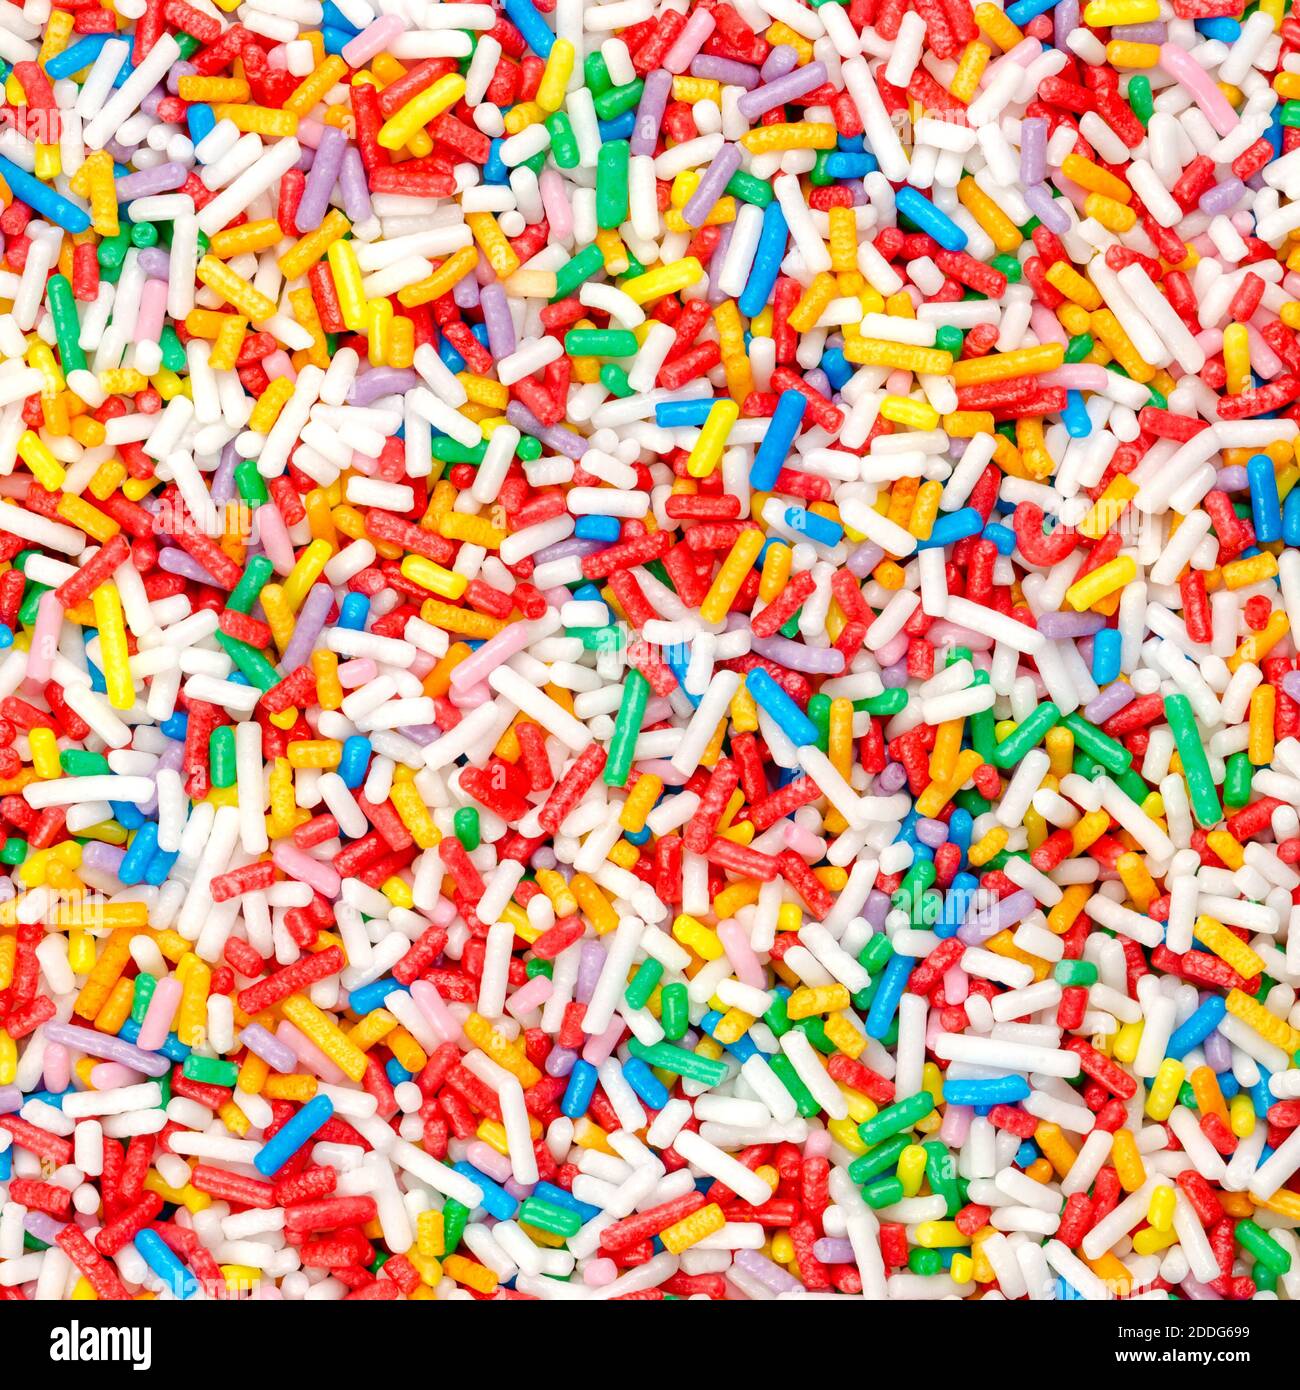 Rainbow sprinkles, square shaped background and surface. Rod-shaped colorful sugar sprinkles. Tiny candies in a variety of colors, used as a topping. Stock Photo